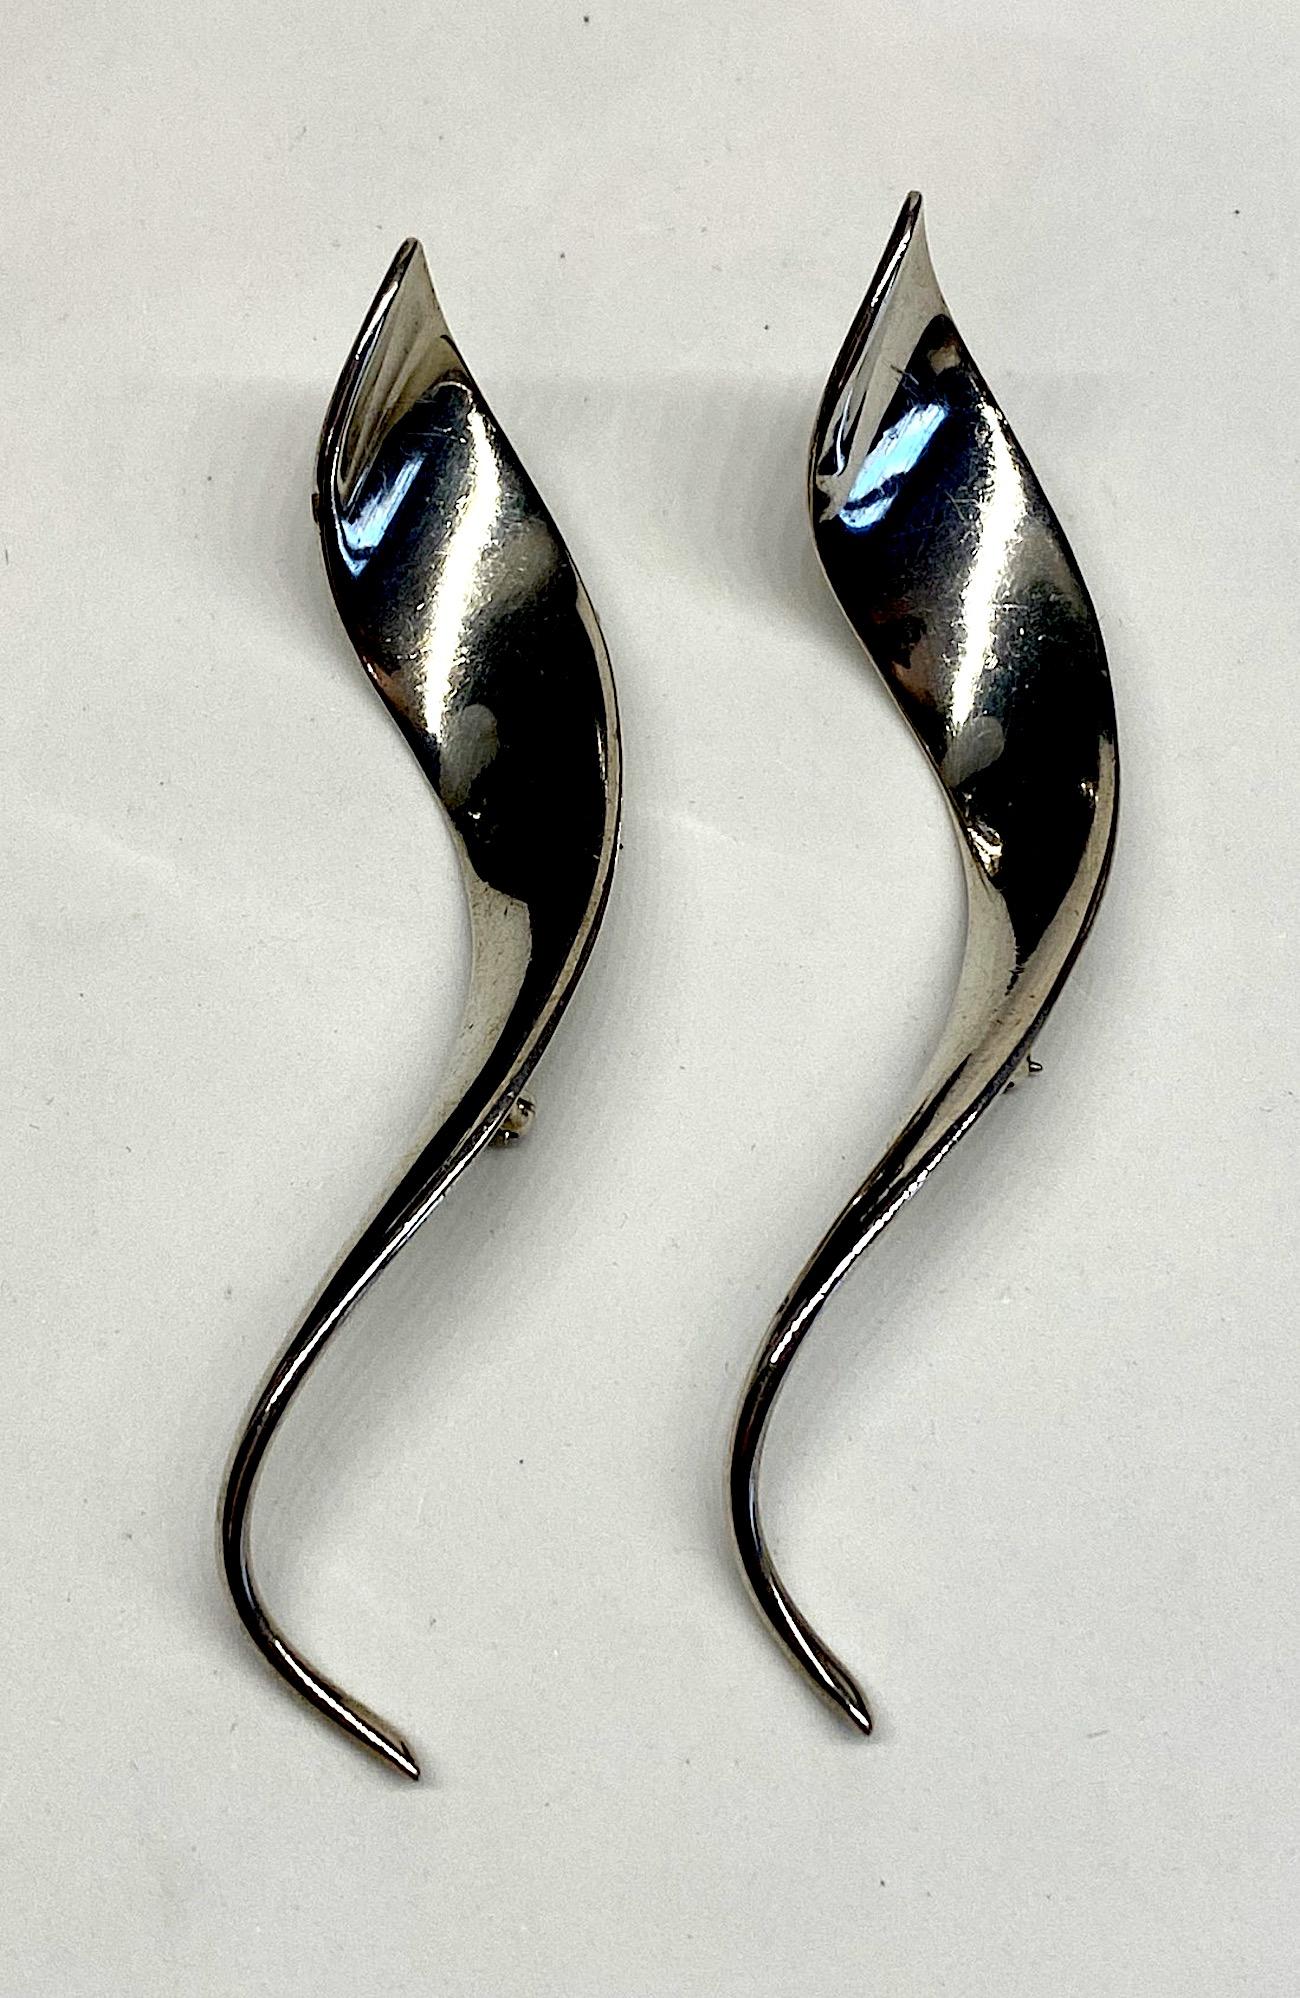 A lovely matched pair of sterling silver freeform abstract spiral brooches. Each brooch is a three dimensional spiral design and measures .75 of an inch at the top and tapers down to a point. They are 4.25 inches long and 1 inch deep. The backs are